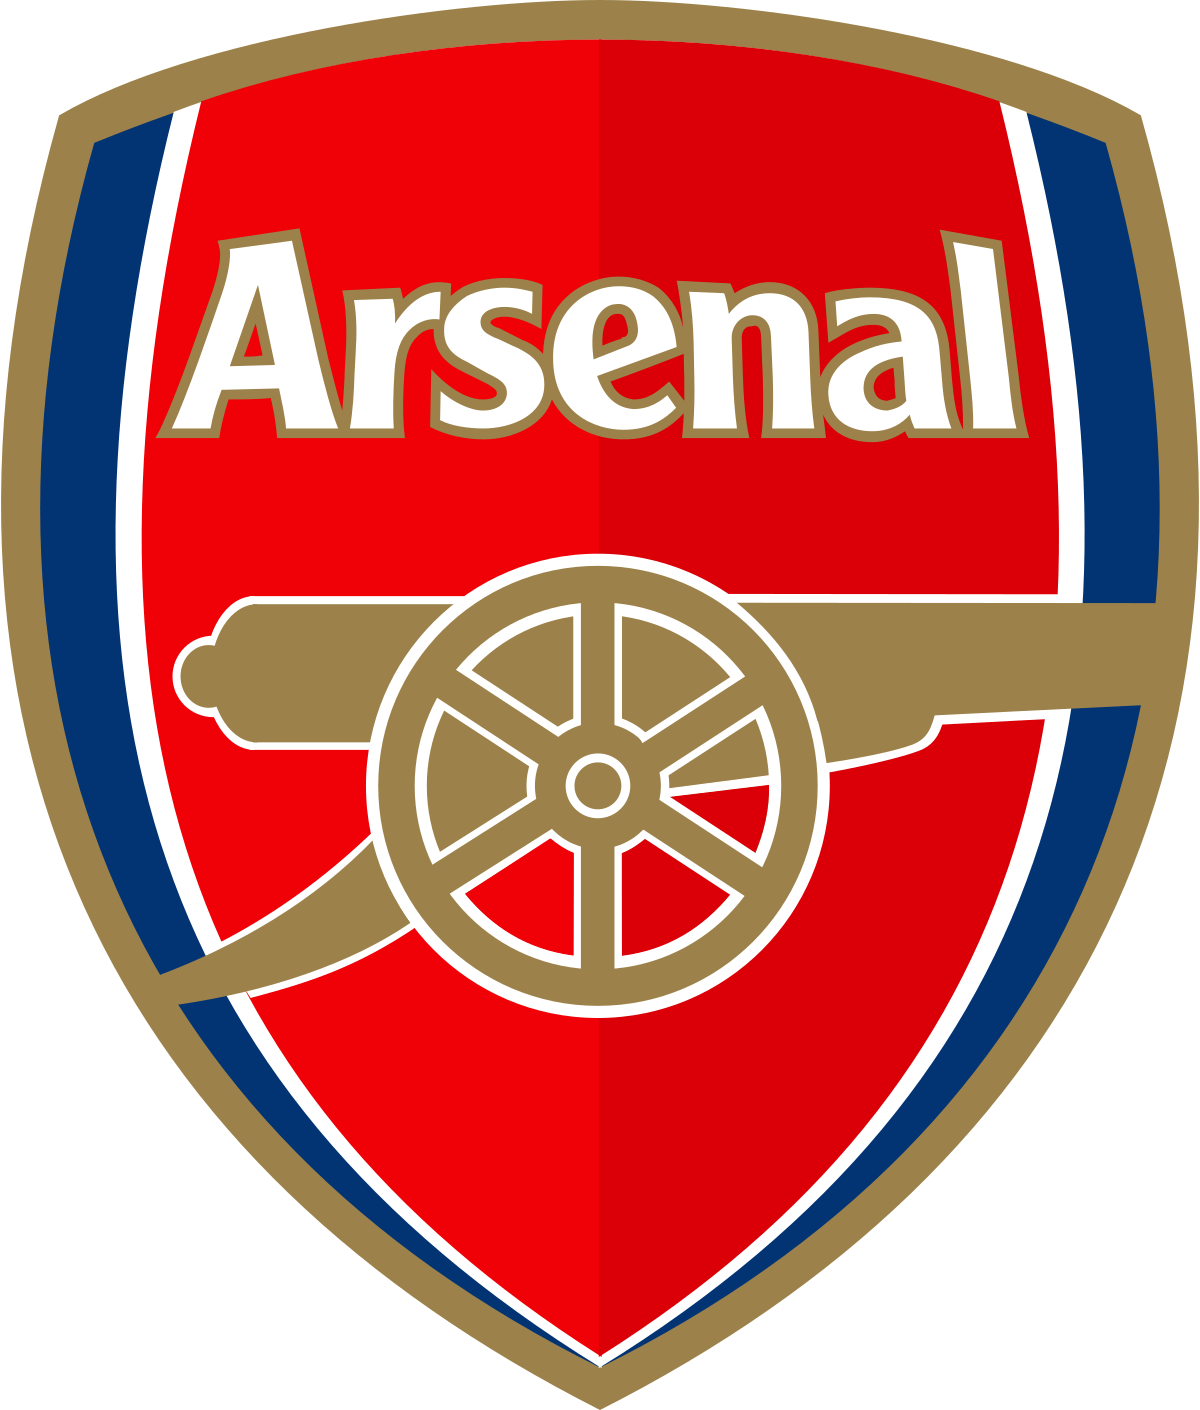 Square in a Red F Logo - Arsenal F.C.